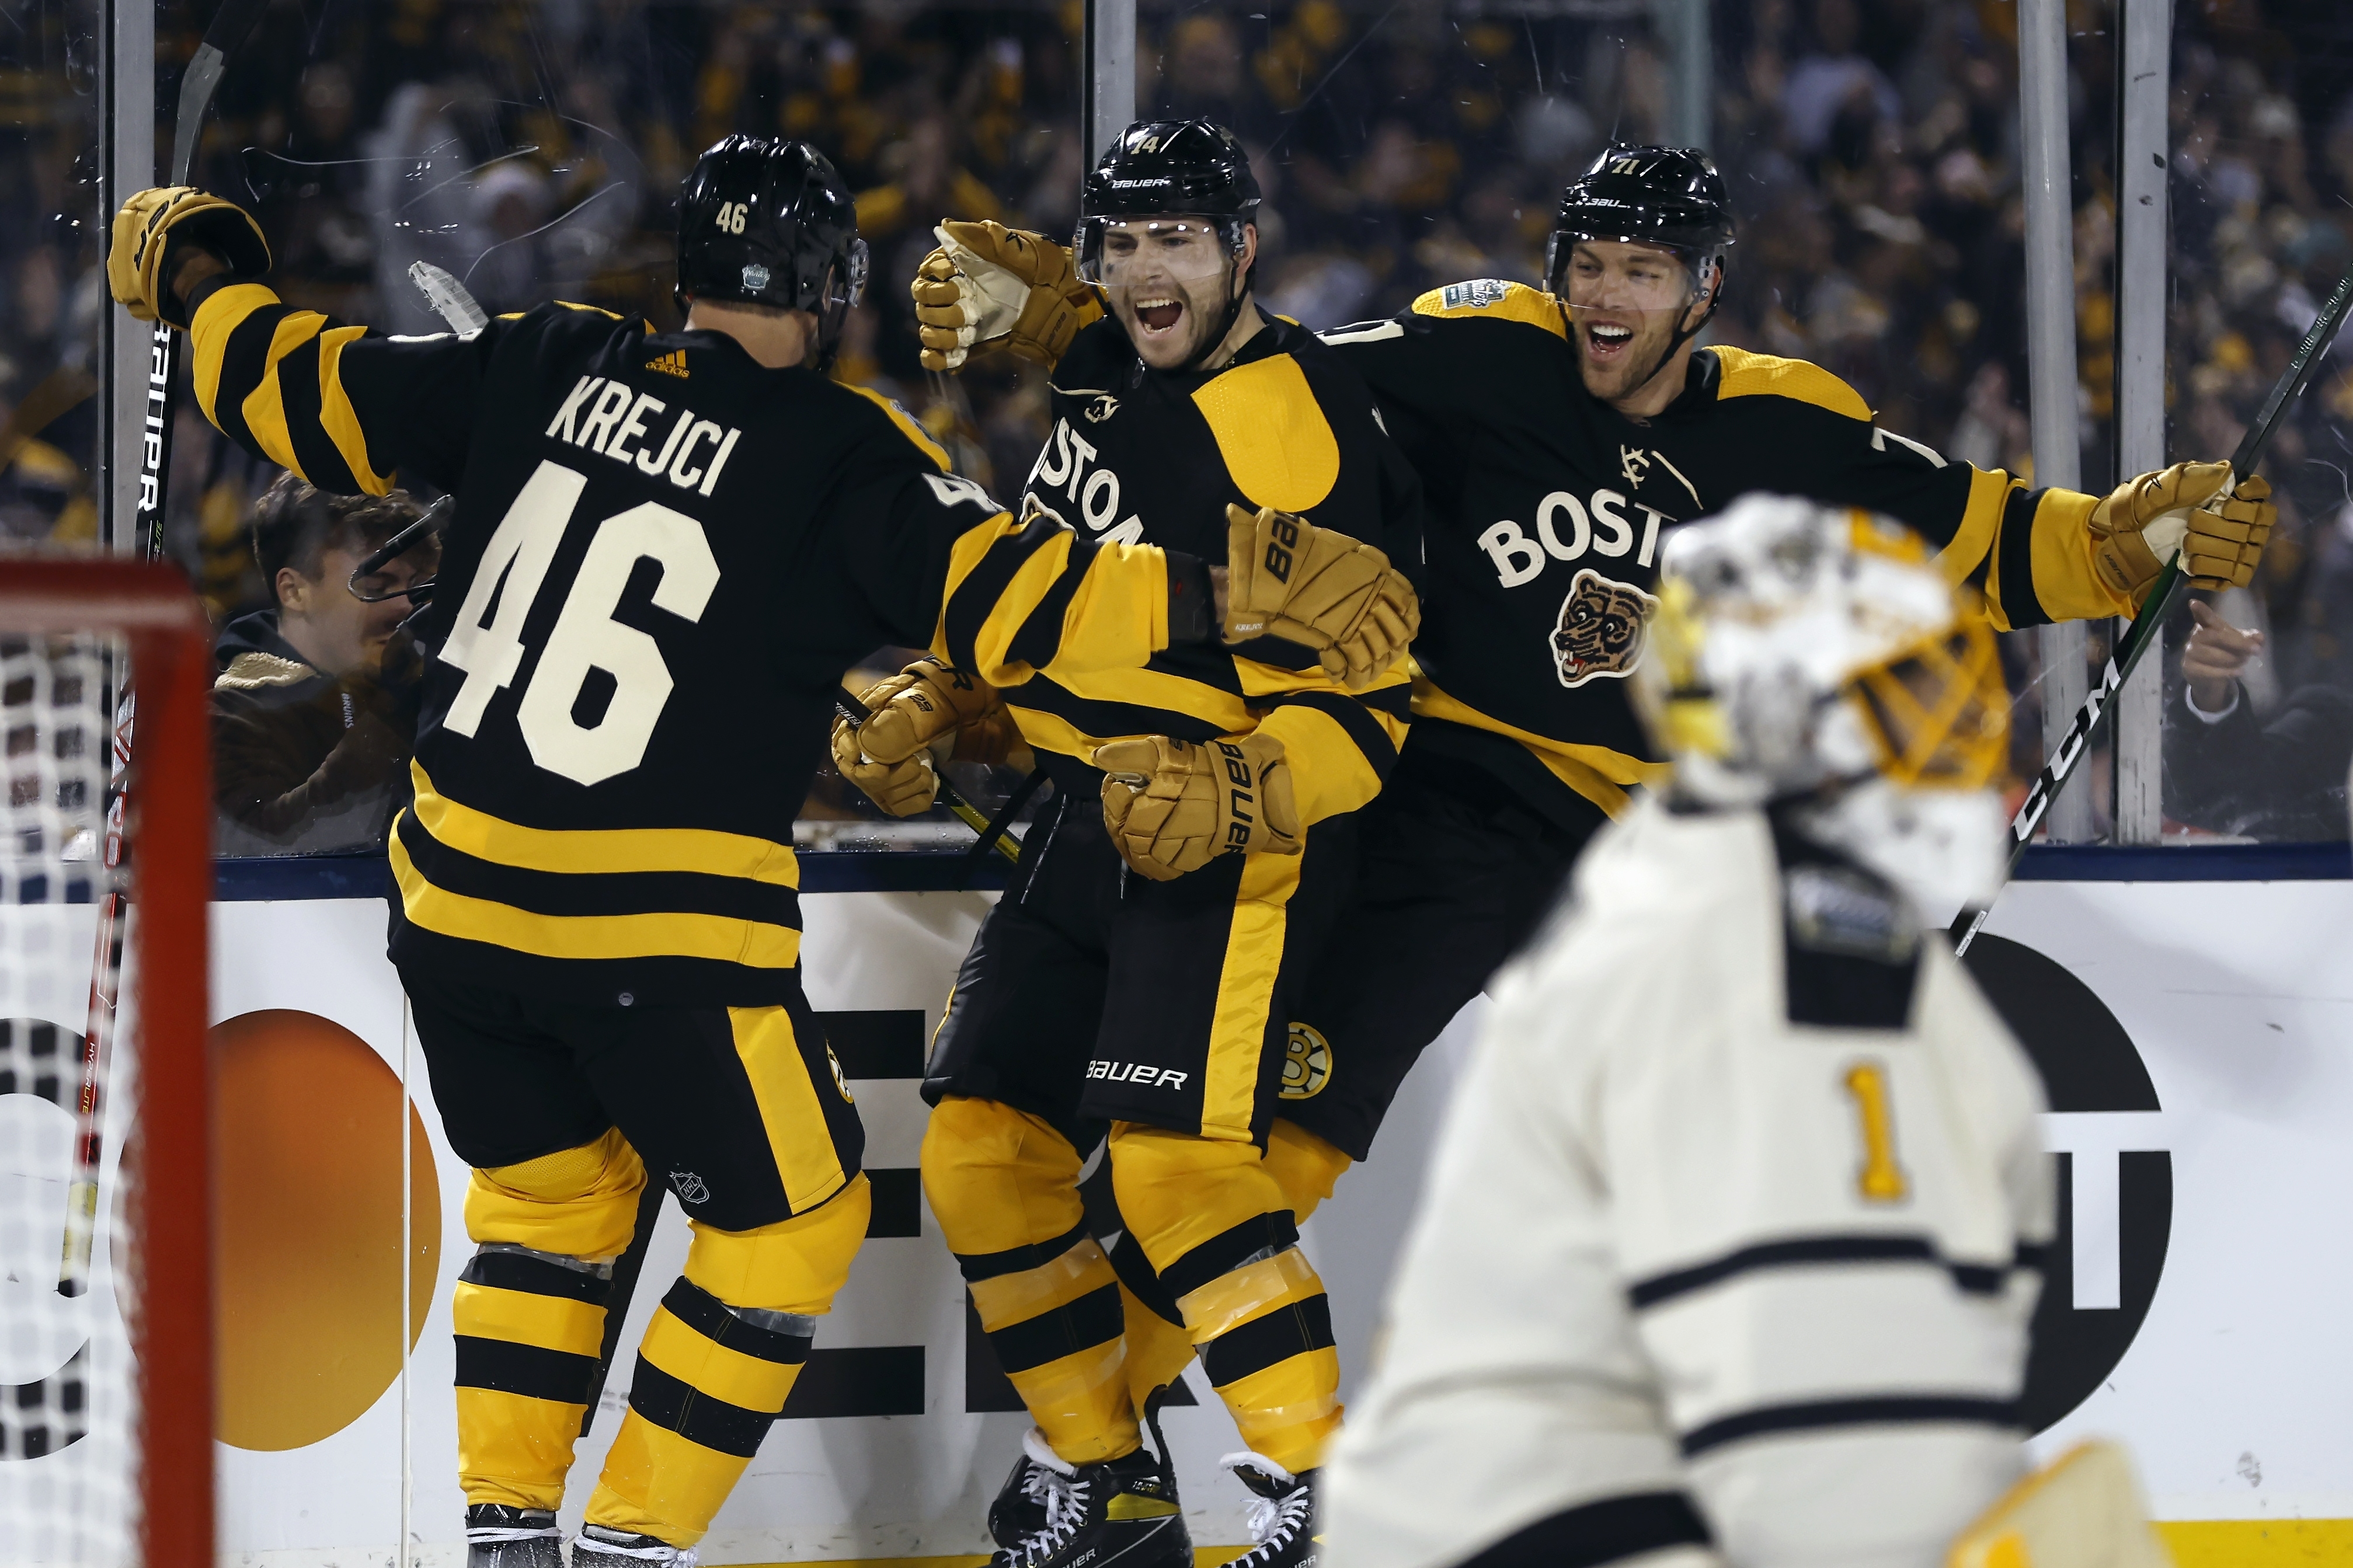 Winter Classic 2023: Bruins rally behind Jake DeBrusk's two goals, Pens'  last-ditch goal waved off